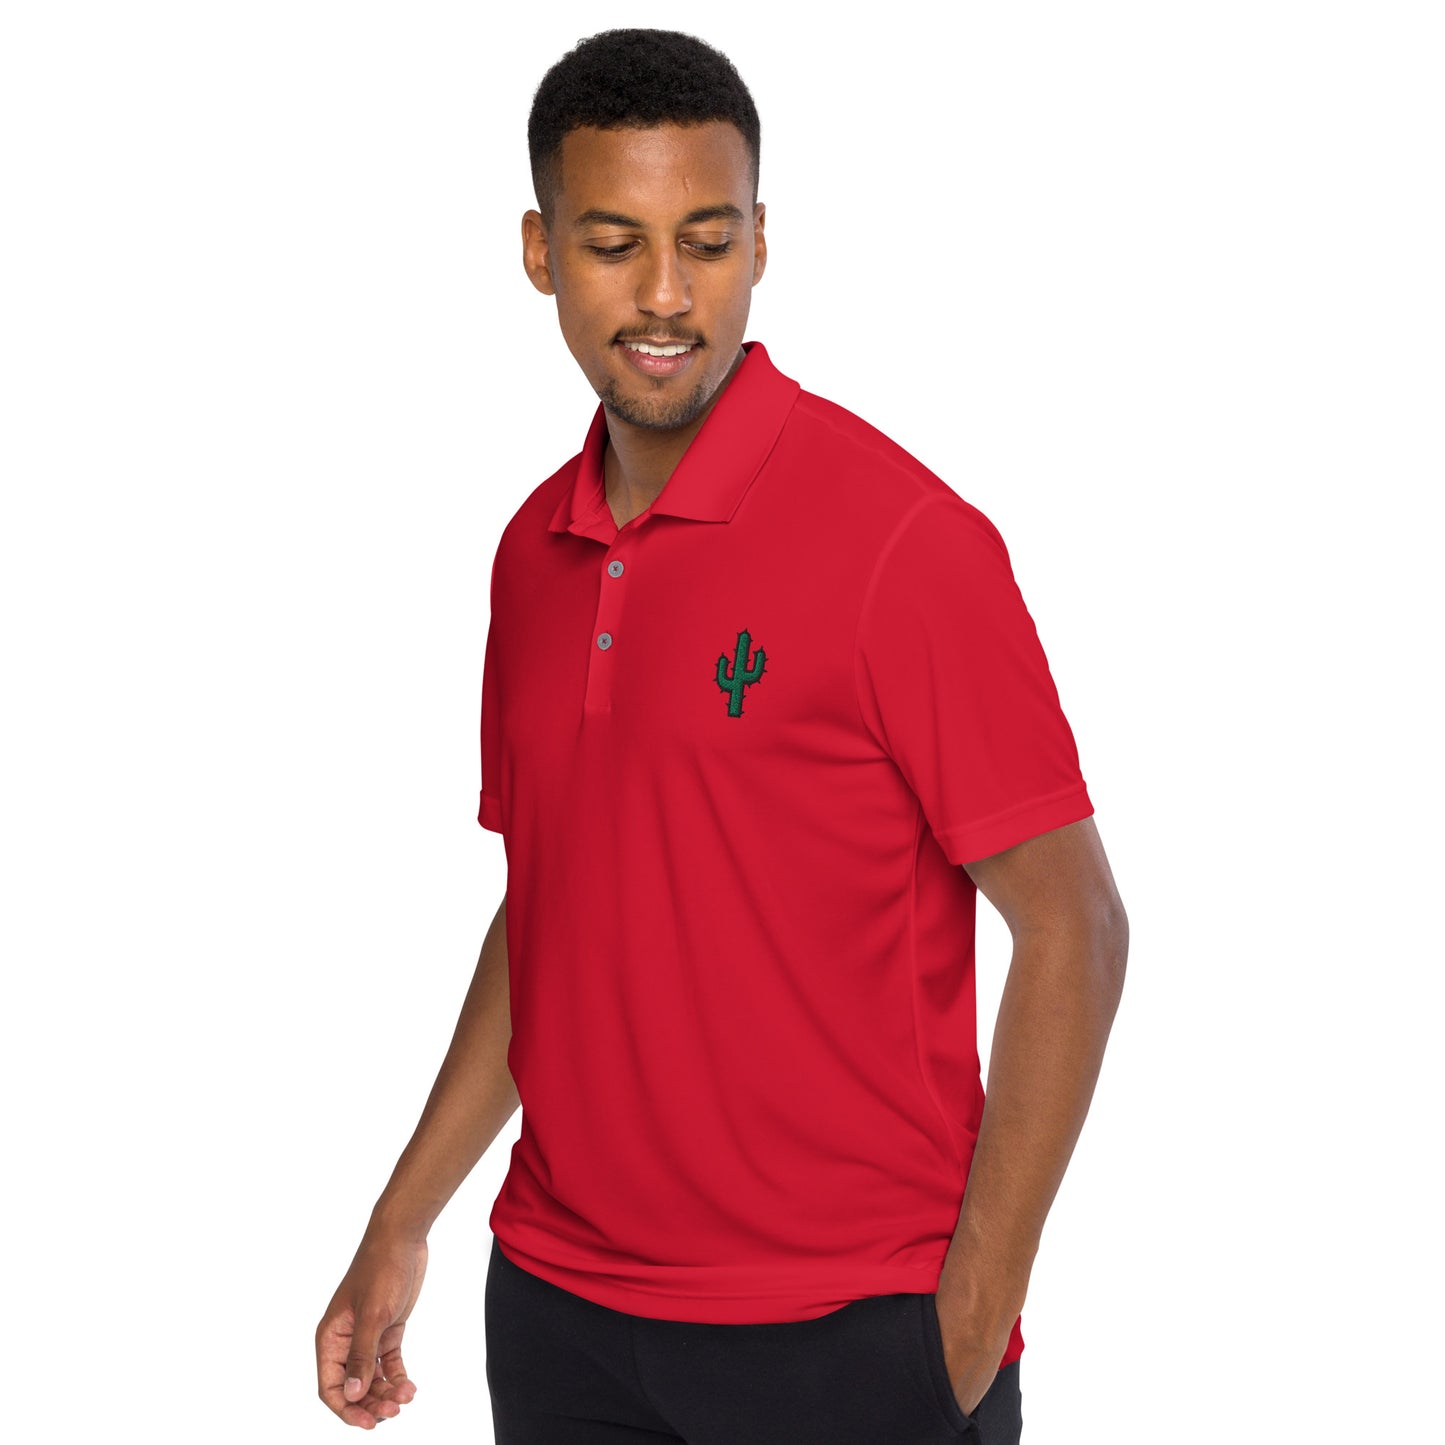 A Adidas Shirt Unleash Your Inner Athlete with Adidas A230 Performance Sport Shirt in Desert Theme - Perfect for Sports Enthusiasts!